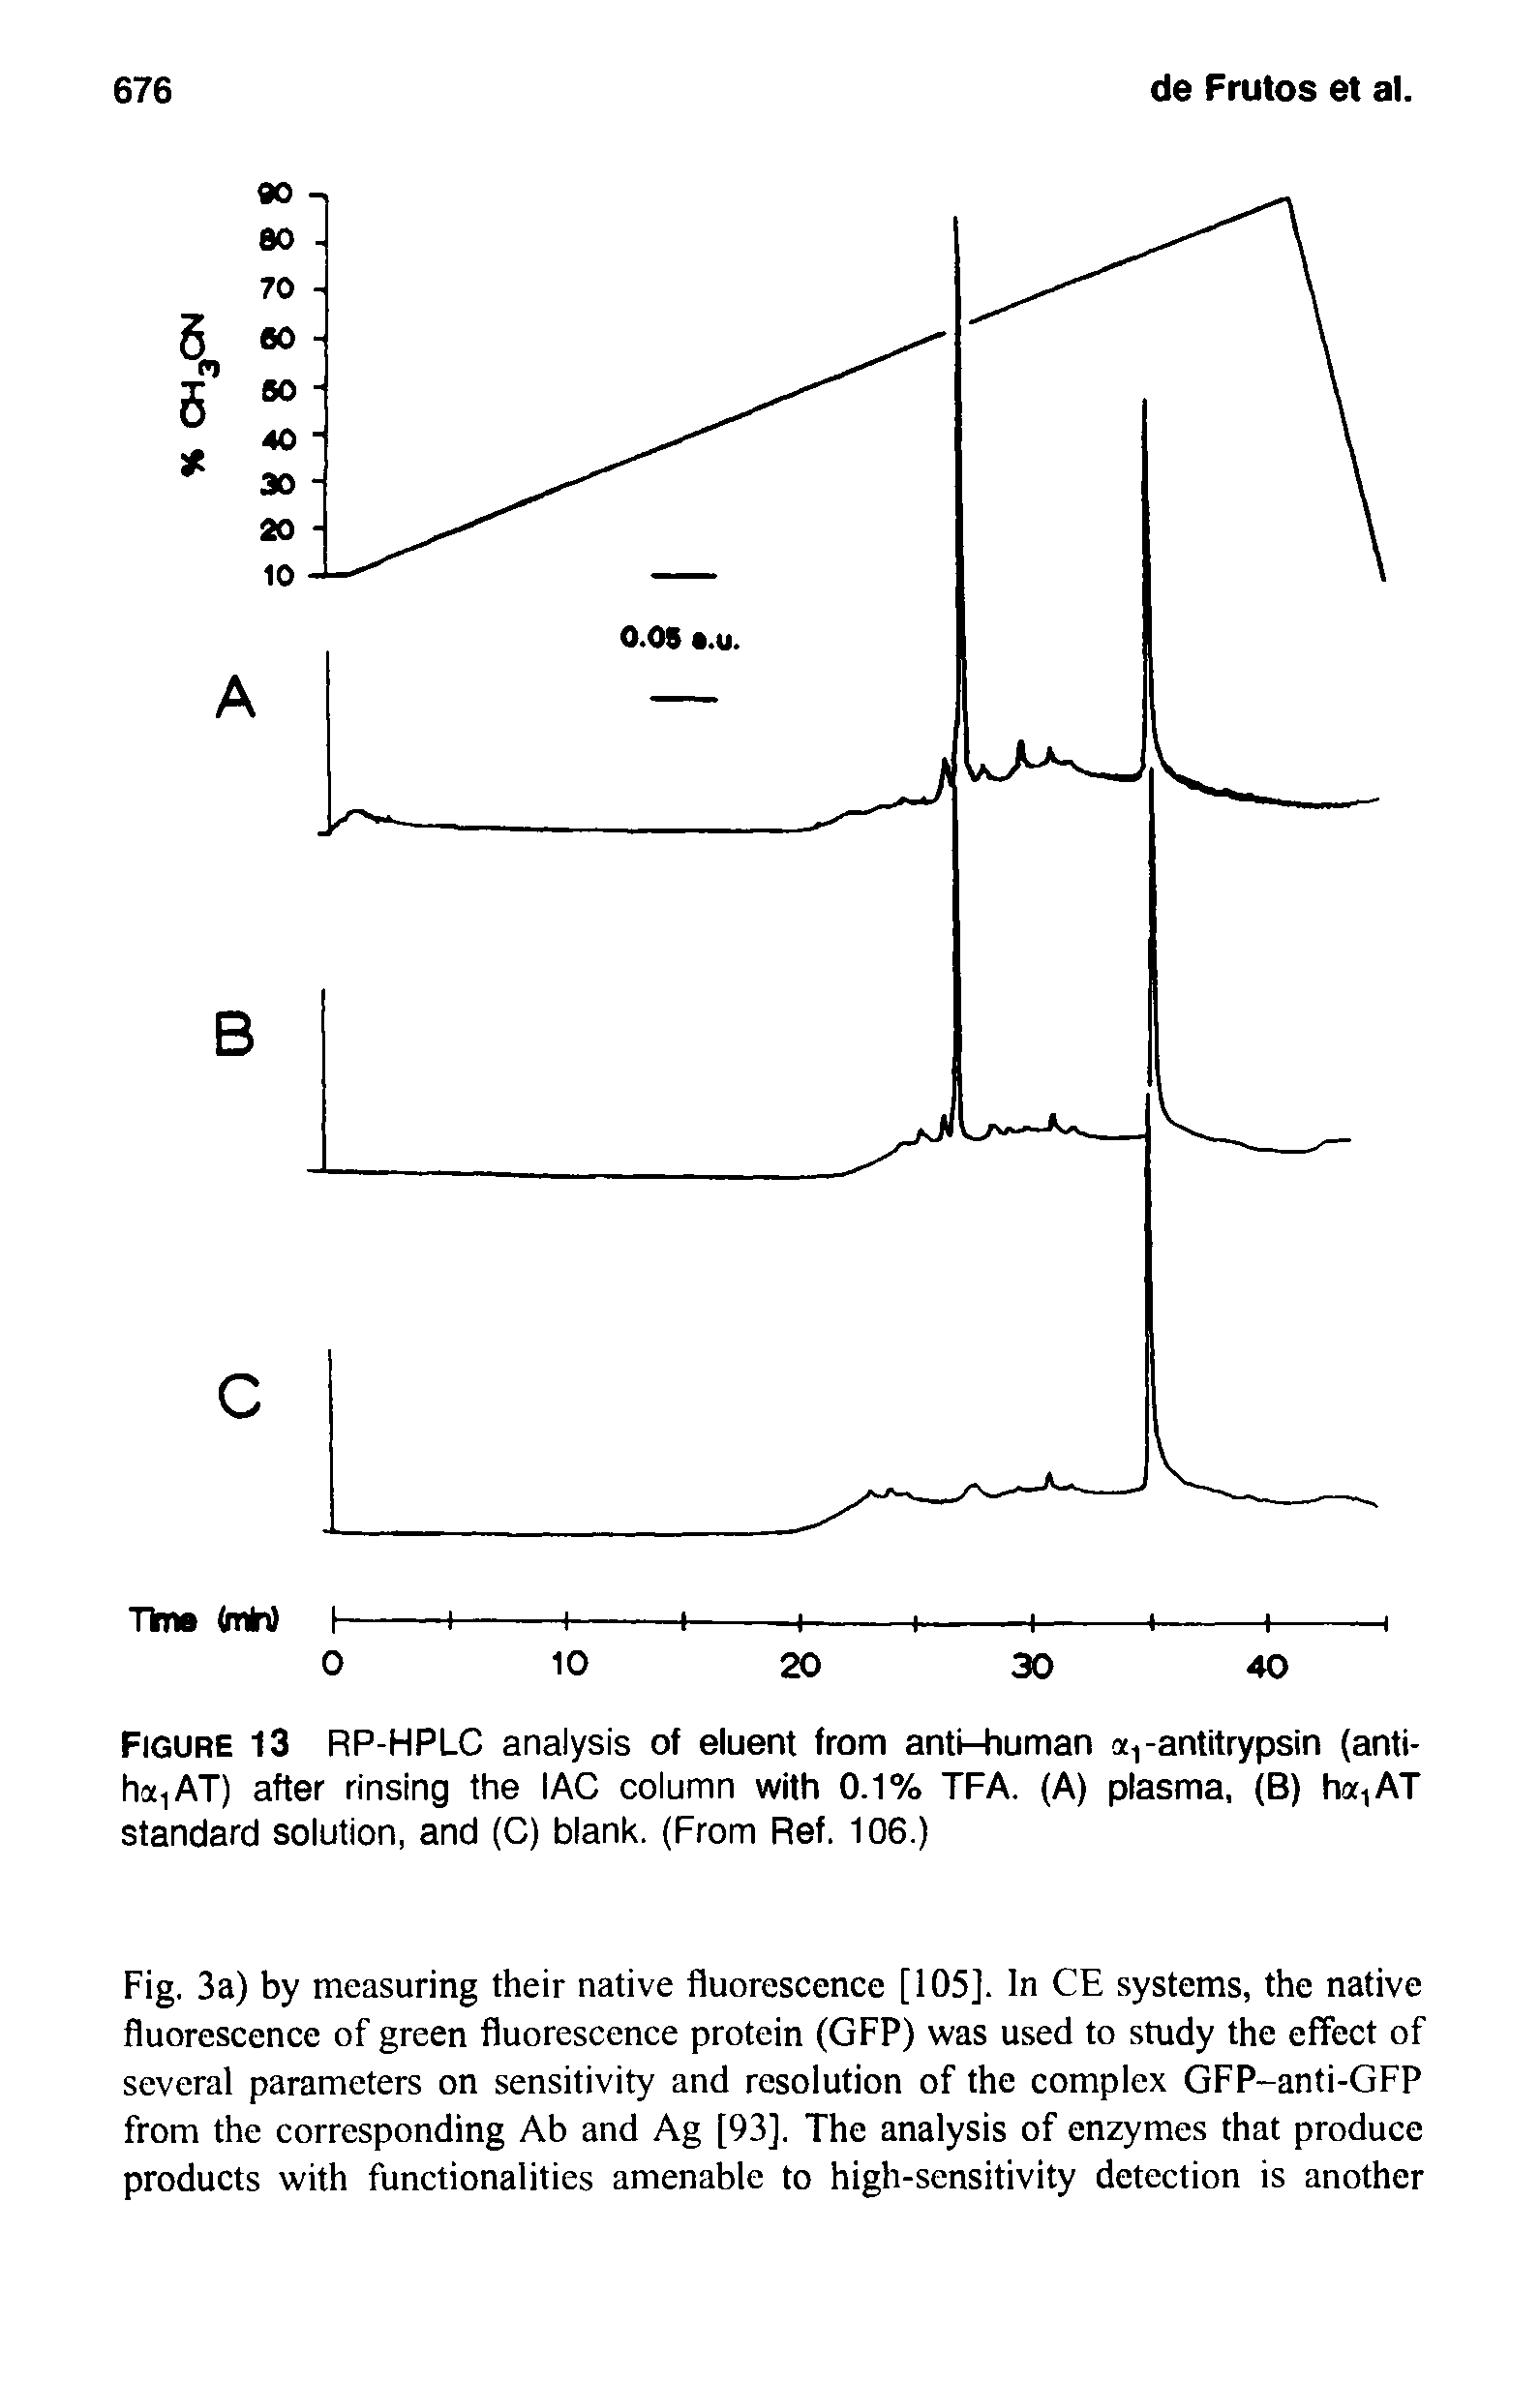 Figure 13 RP-HPLC analysis of eluent from anti-human -antitrypsin (anti-h iAT) after rinsing the lAC column with 0.1% TFA. (A) plasma, (B) ha,AT standard solution, and (C) blank. (From Ref. 106.)...